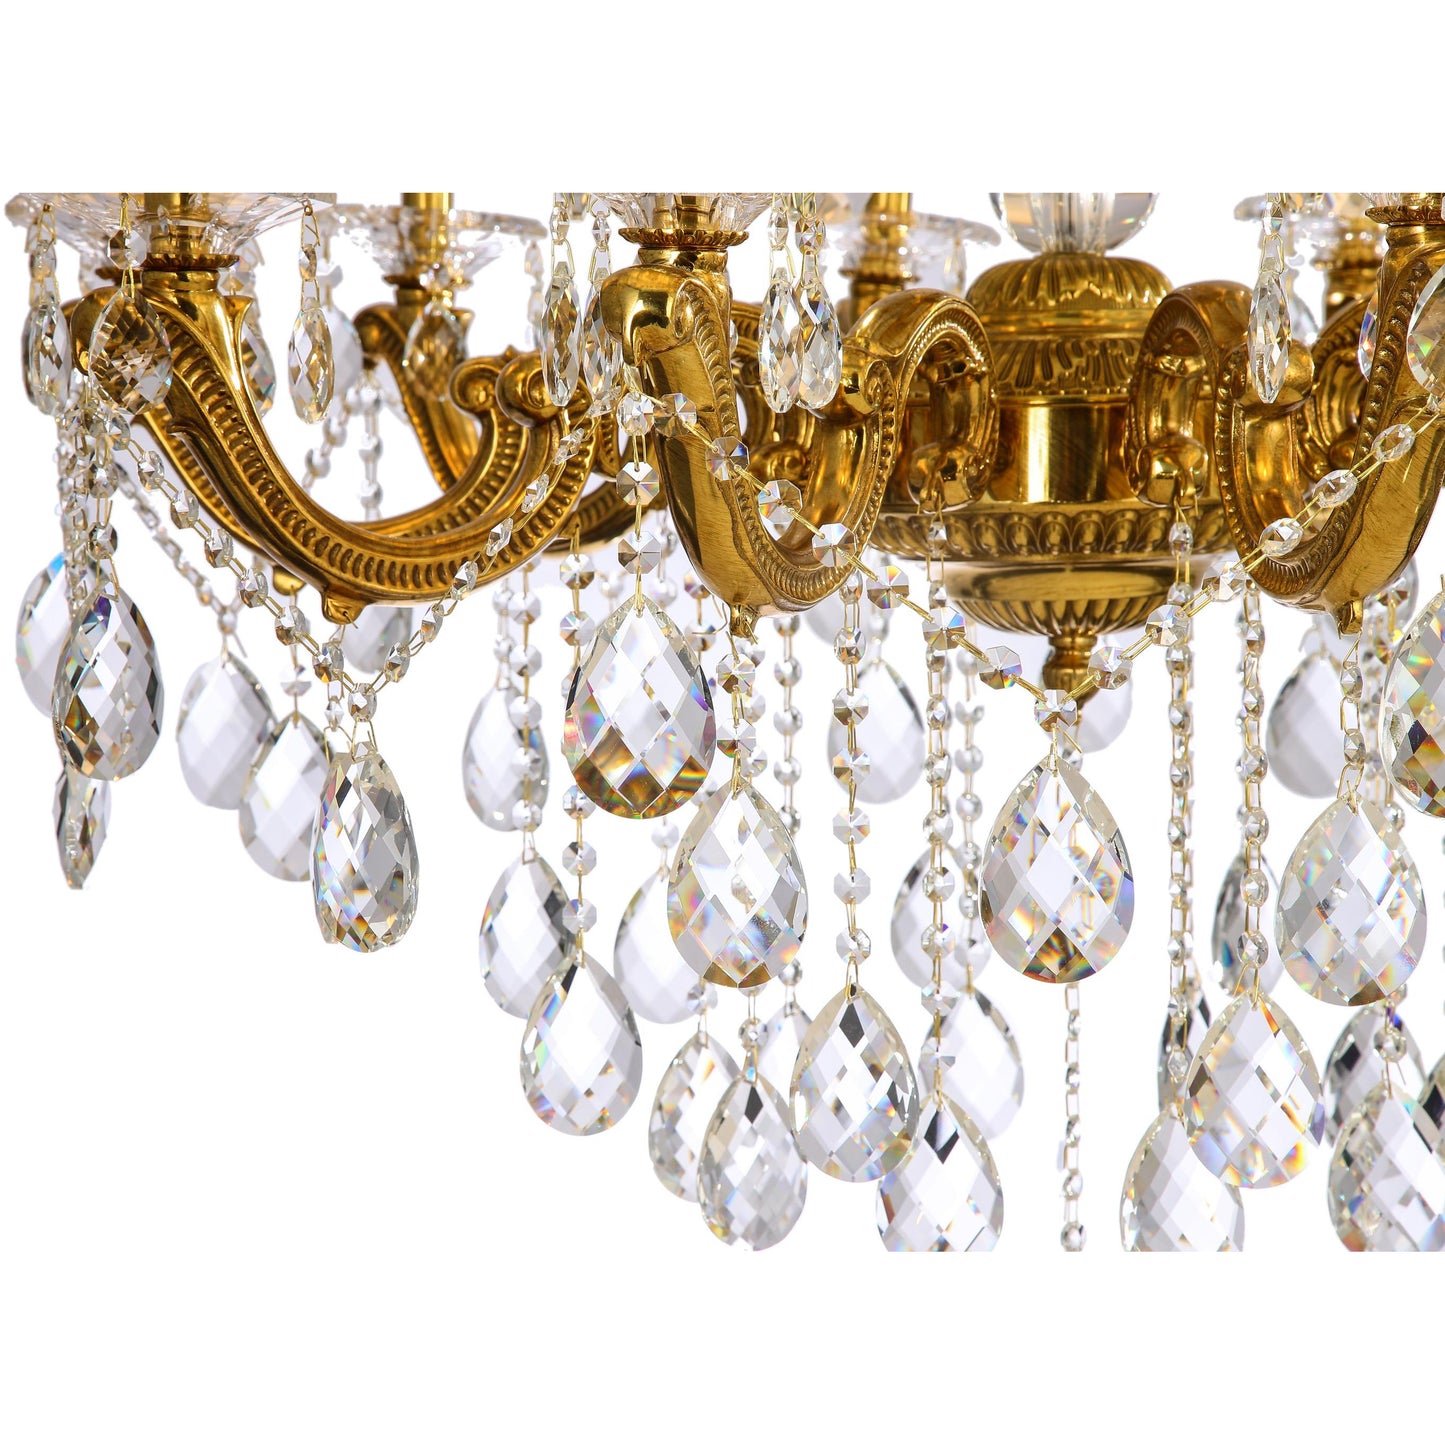 Three Tier Brass and Crystal Chandelier